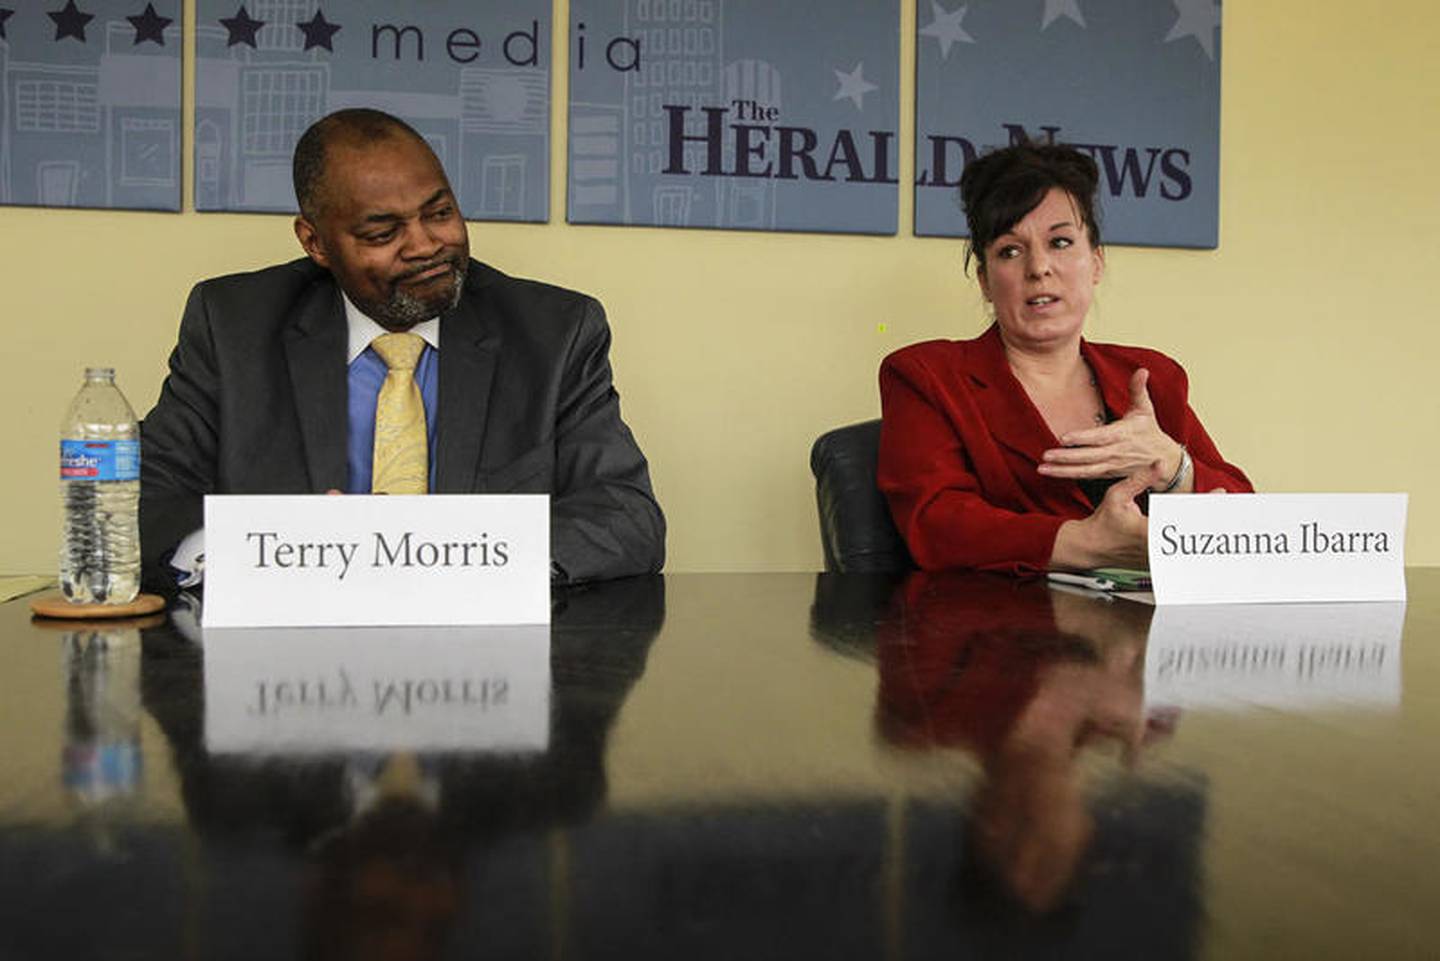 Joliet District 5 City Council member Terry Morris (left) and candidate Suzanna Ibarra speak to The Herald-News on Thursday in Joliet.